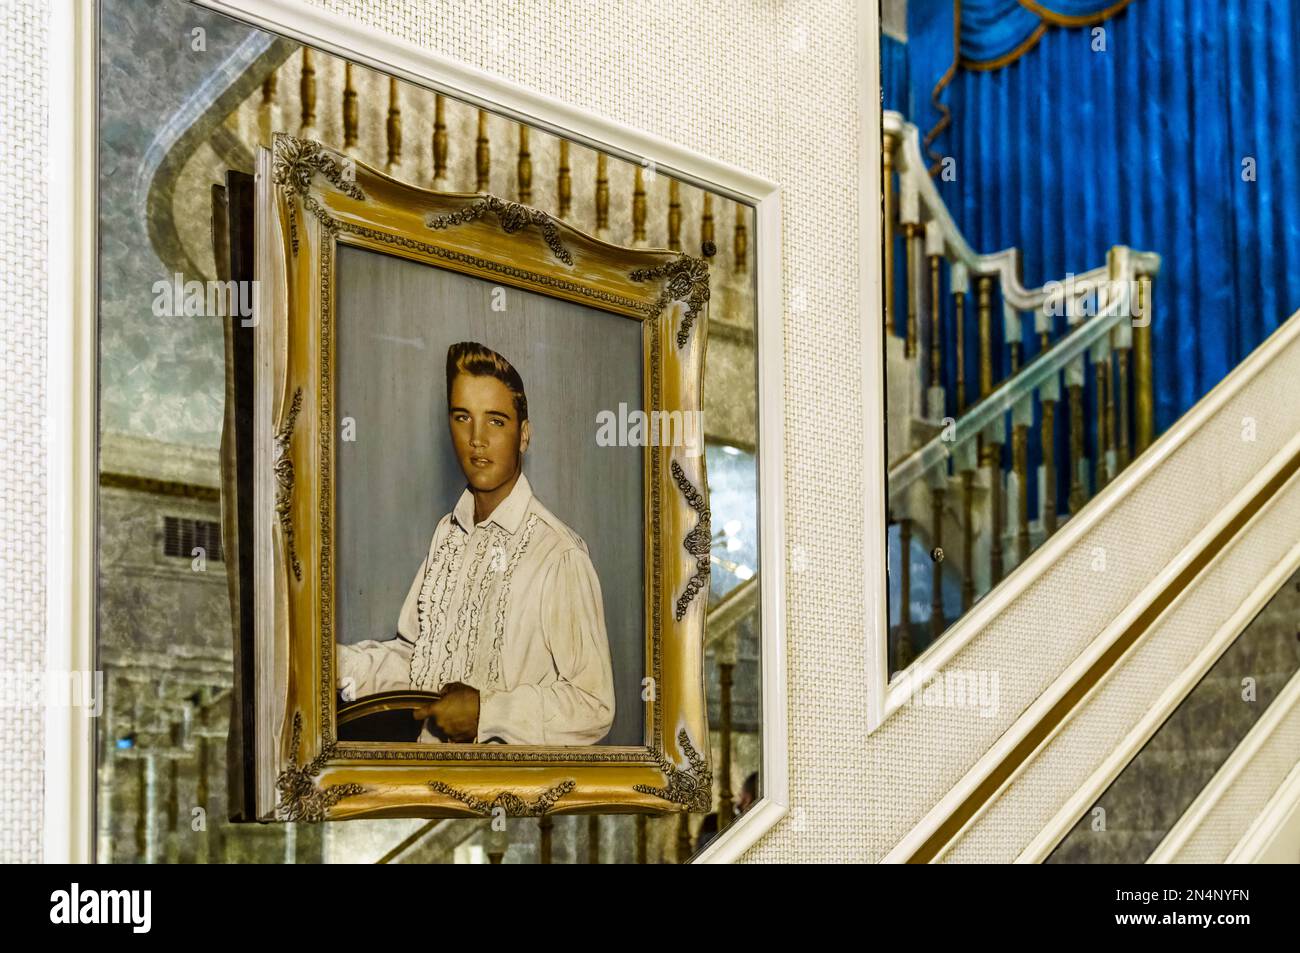 The oil portrait of Elvis Presley on the main staircase in Graceland, his home in Memphis, Tennessee. Stock Photo